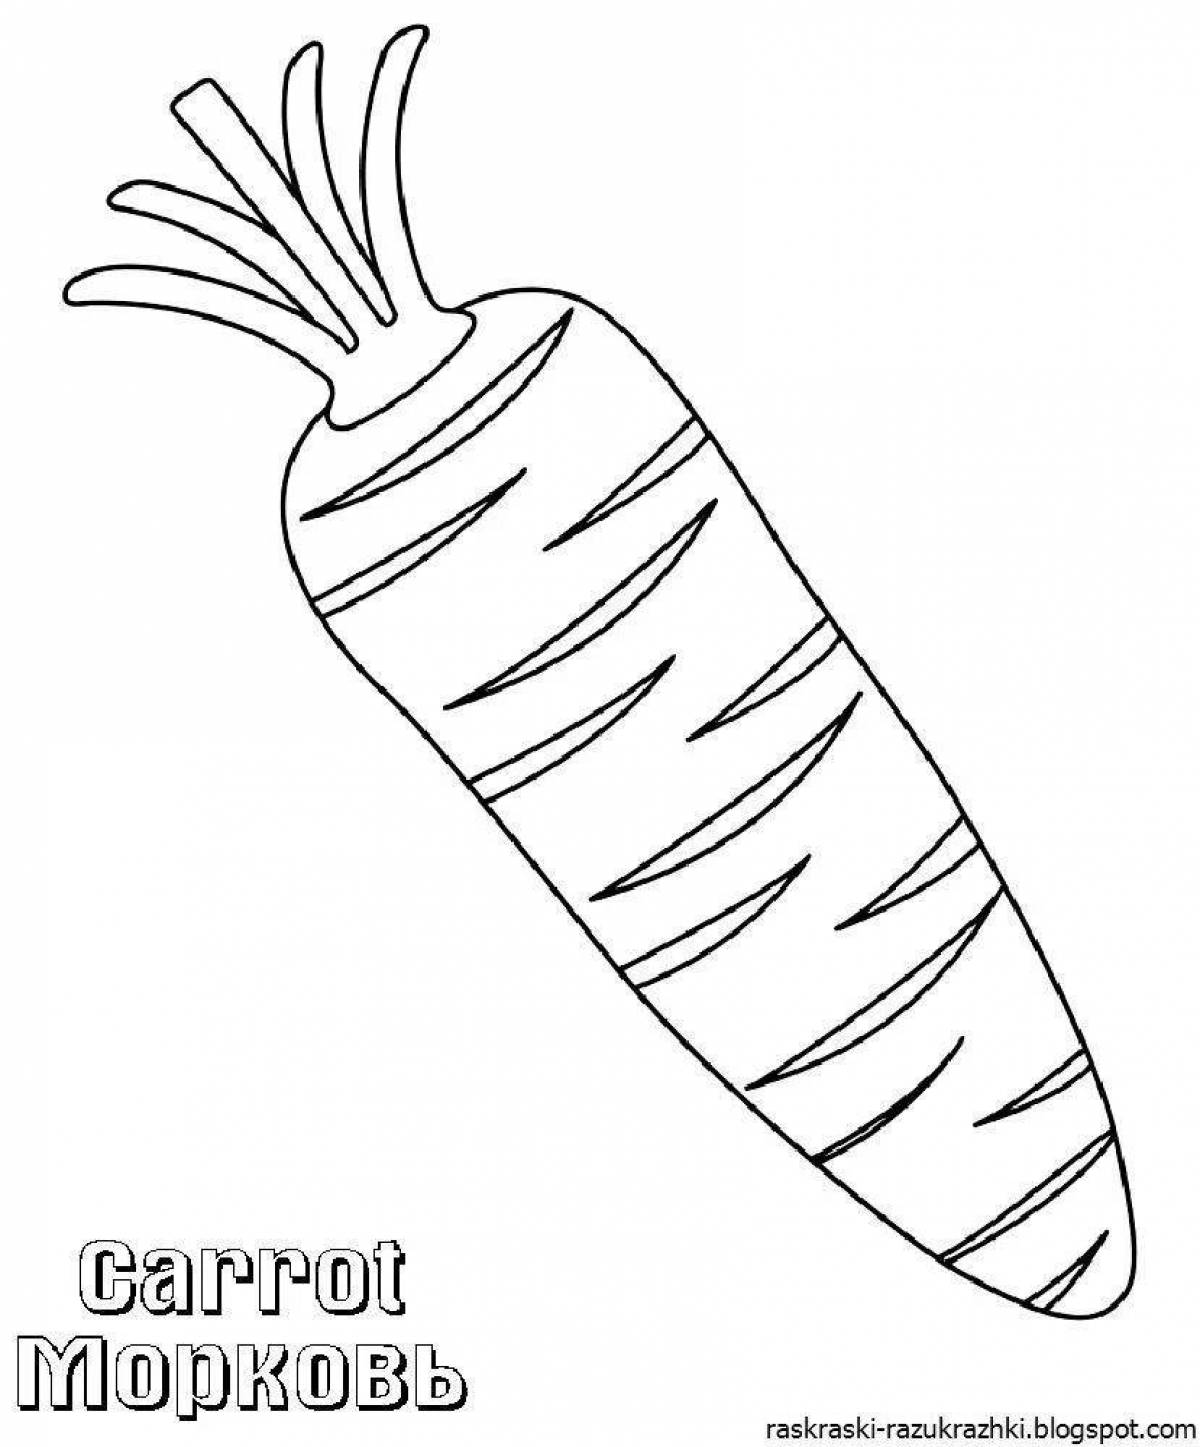 Great carrot coloring book for 2-3 year olds